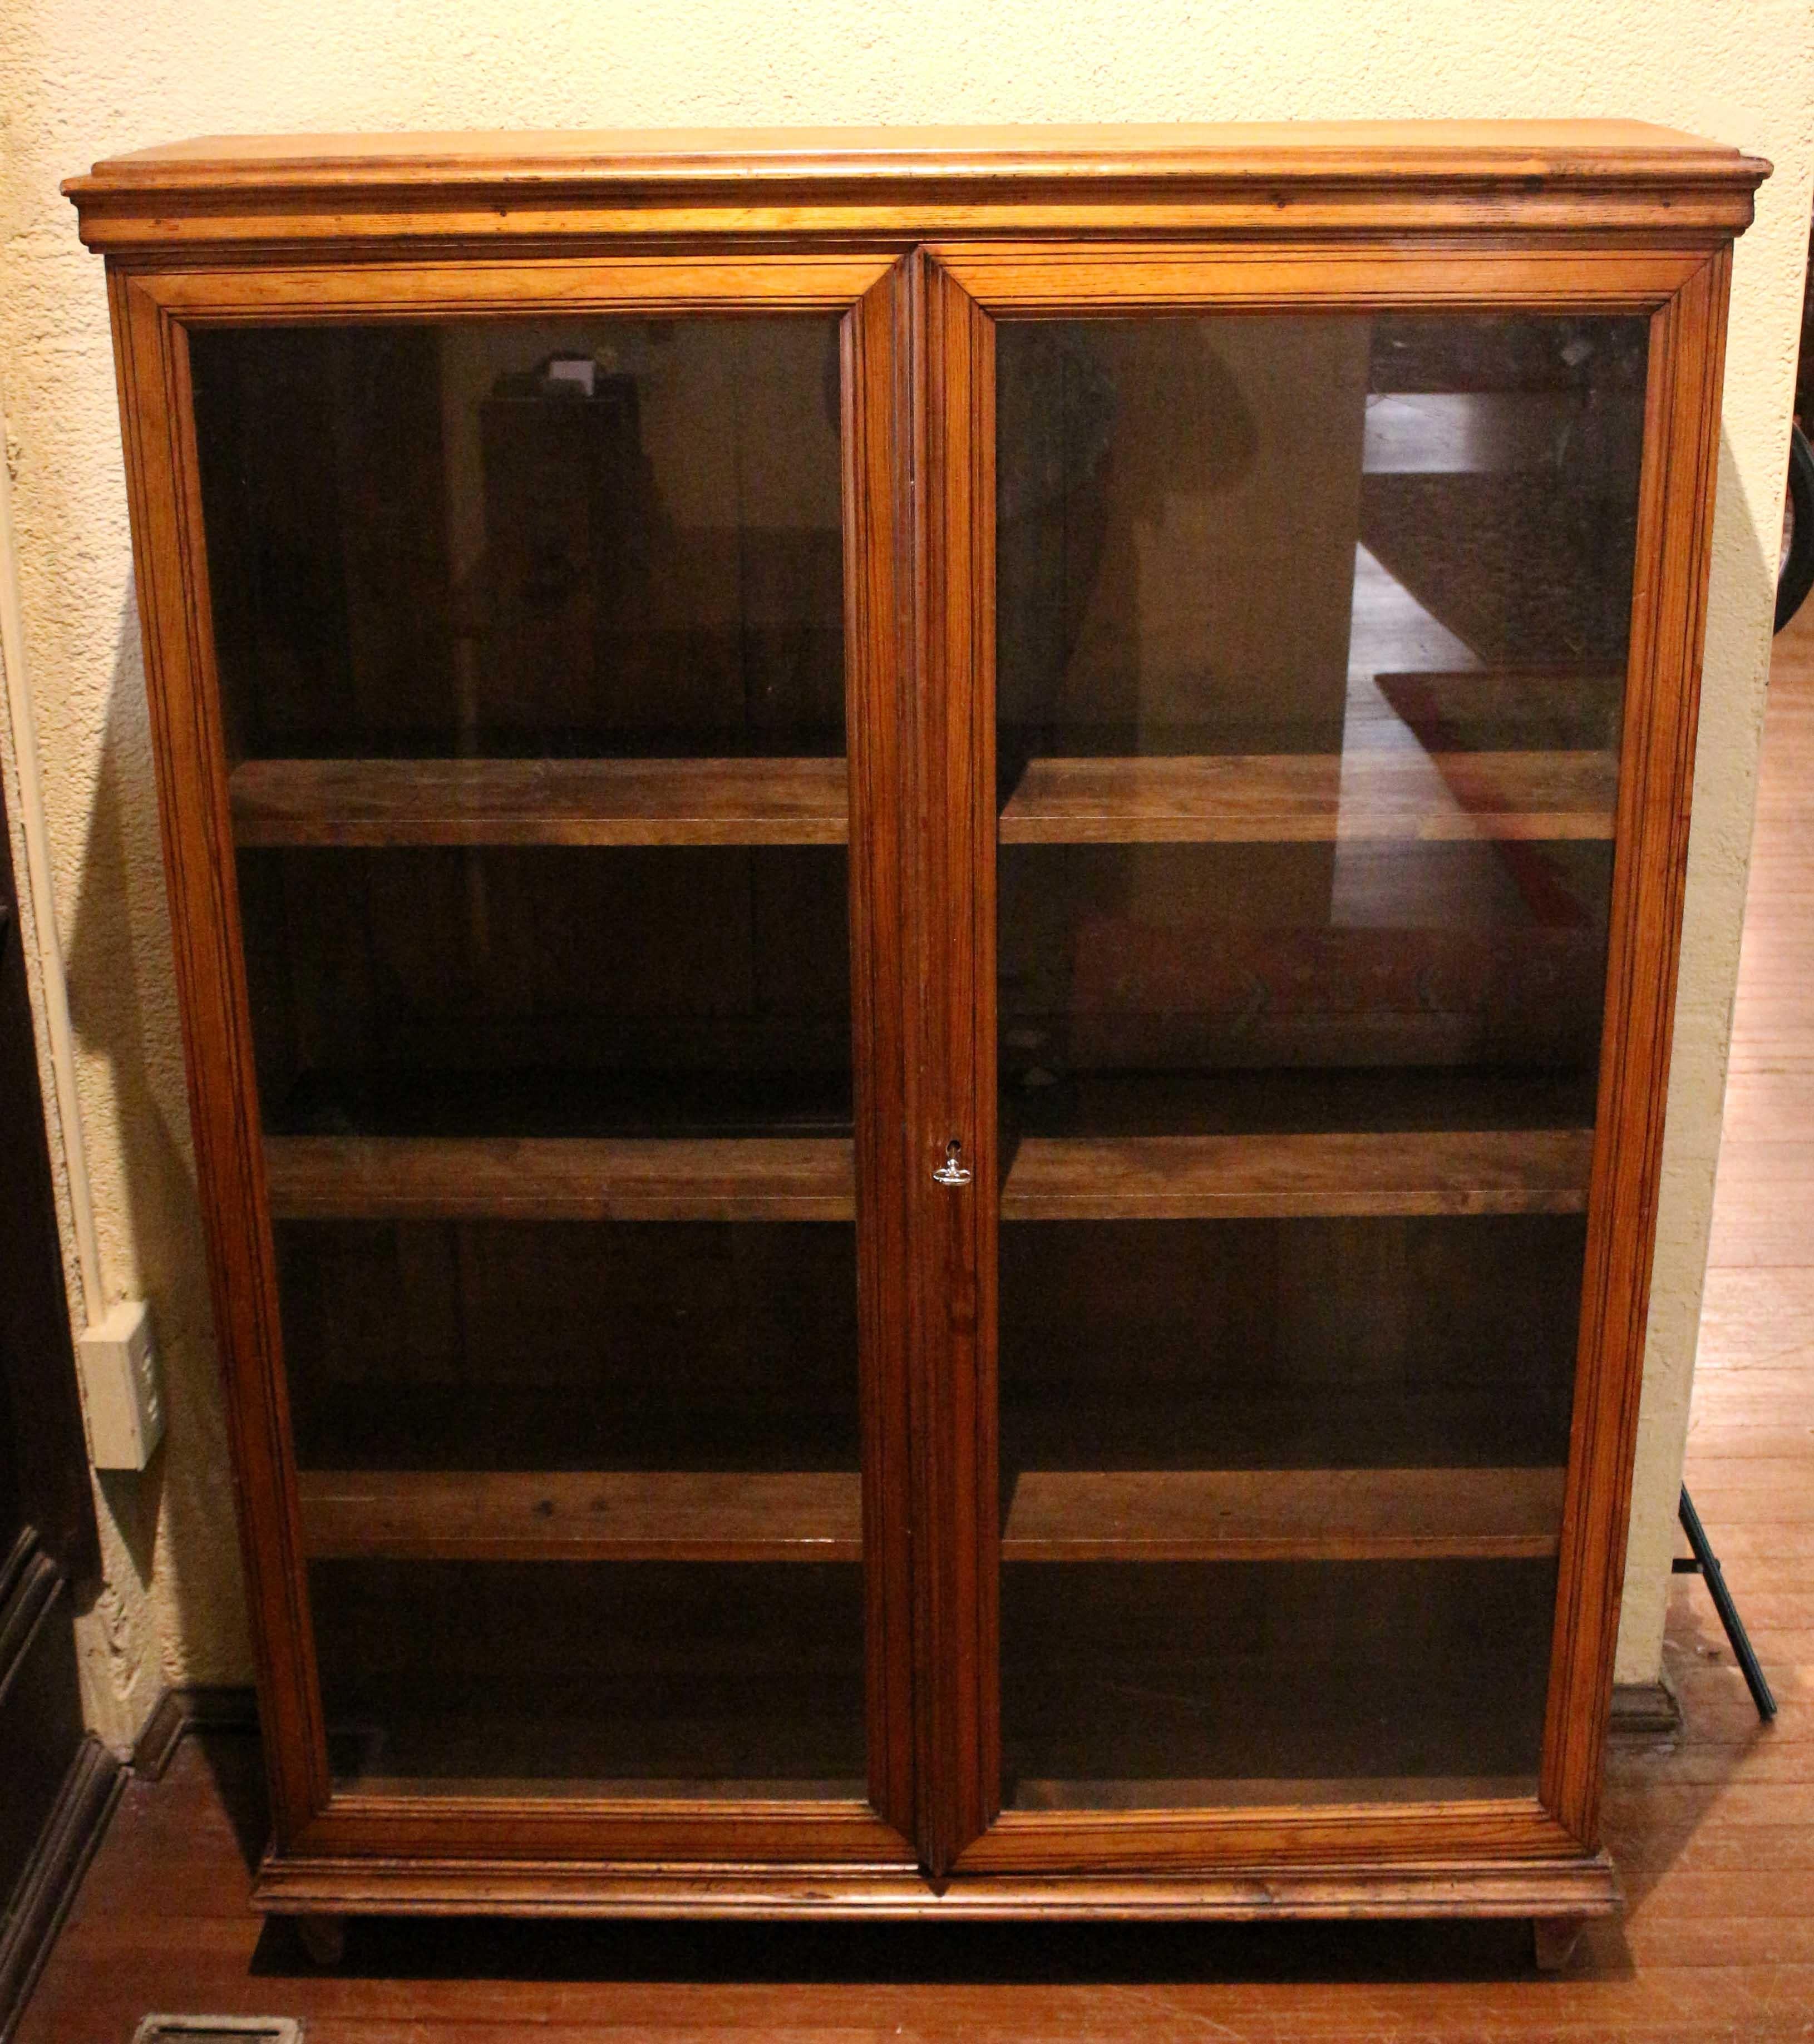 Mid-19th century double glazed door bibliotheque (bookcase), French. Louis Philippe period. Molded top. Ebony line inlaid doors. Plinth molded base raised on short, recessed, simple feet. 41 1/8